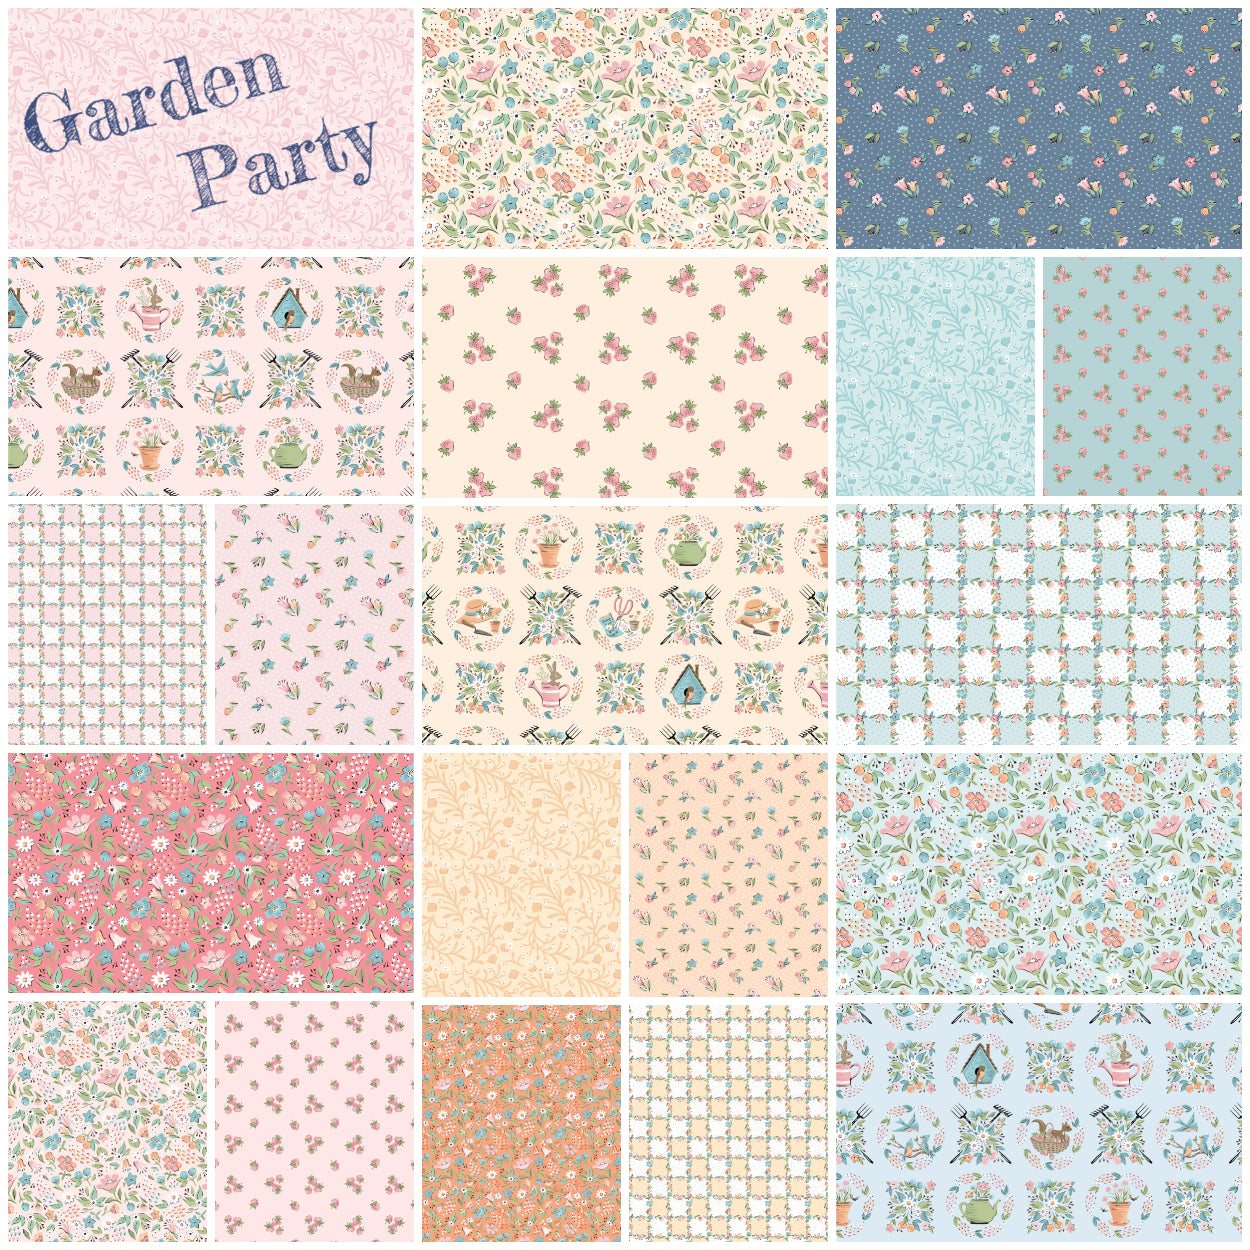 Garden Party by Sheri McCulley for Poppie Cotton